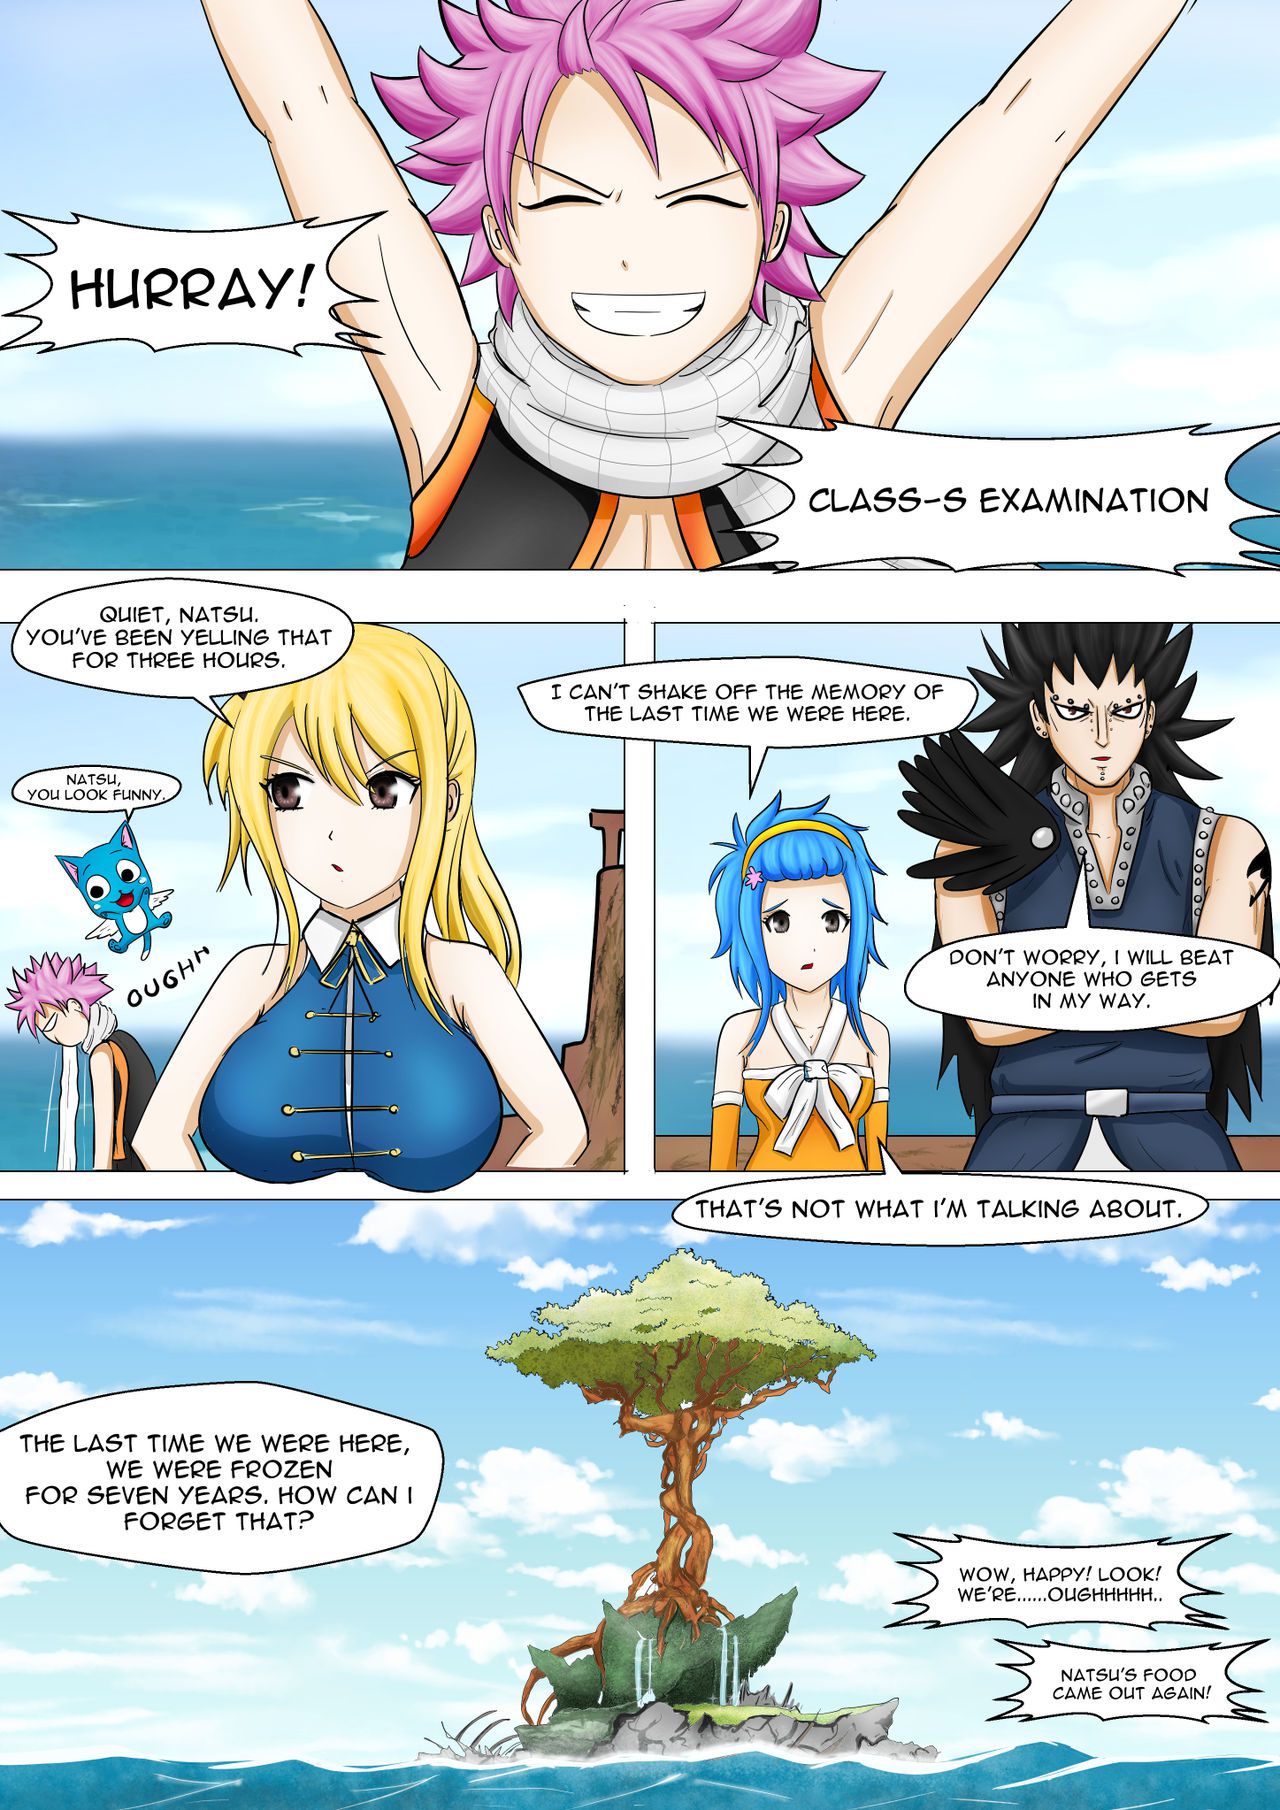 [EscapeFromExpansion] A Huger Game (Fairy Tail) [Ongoing] 2